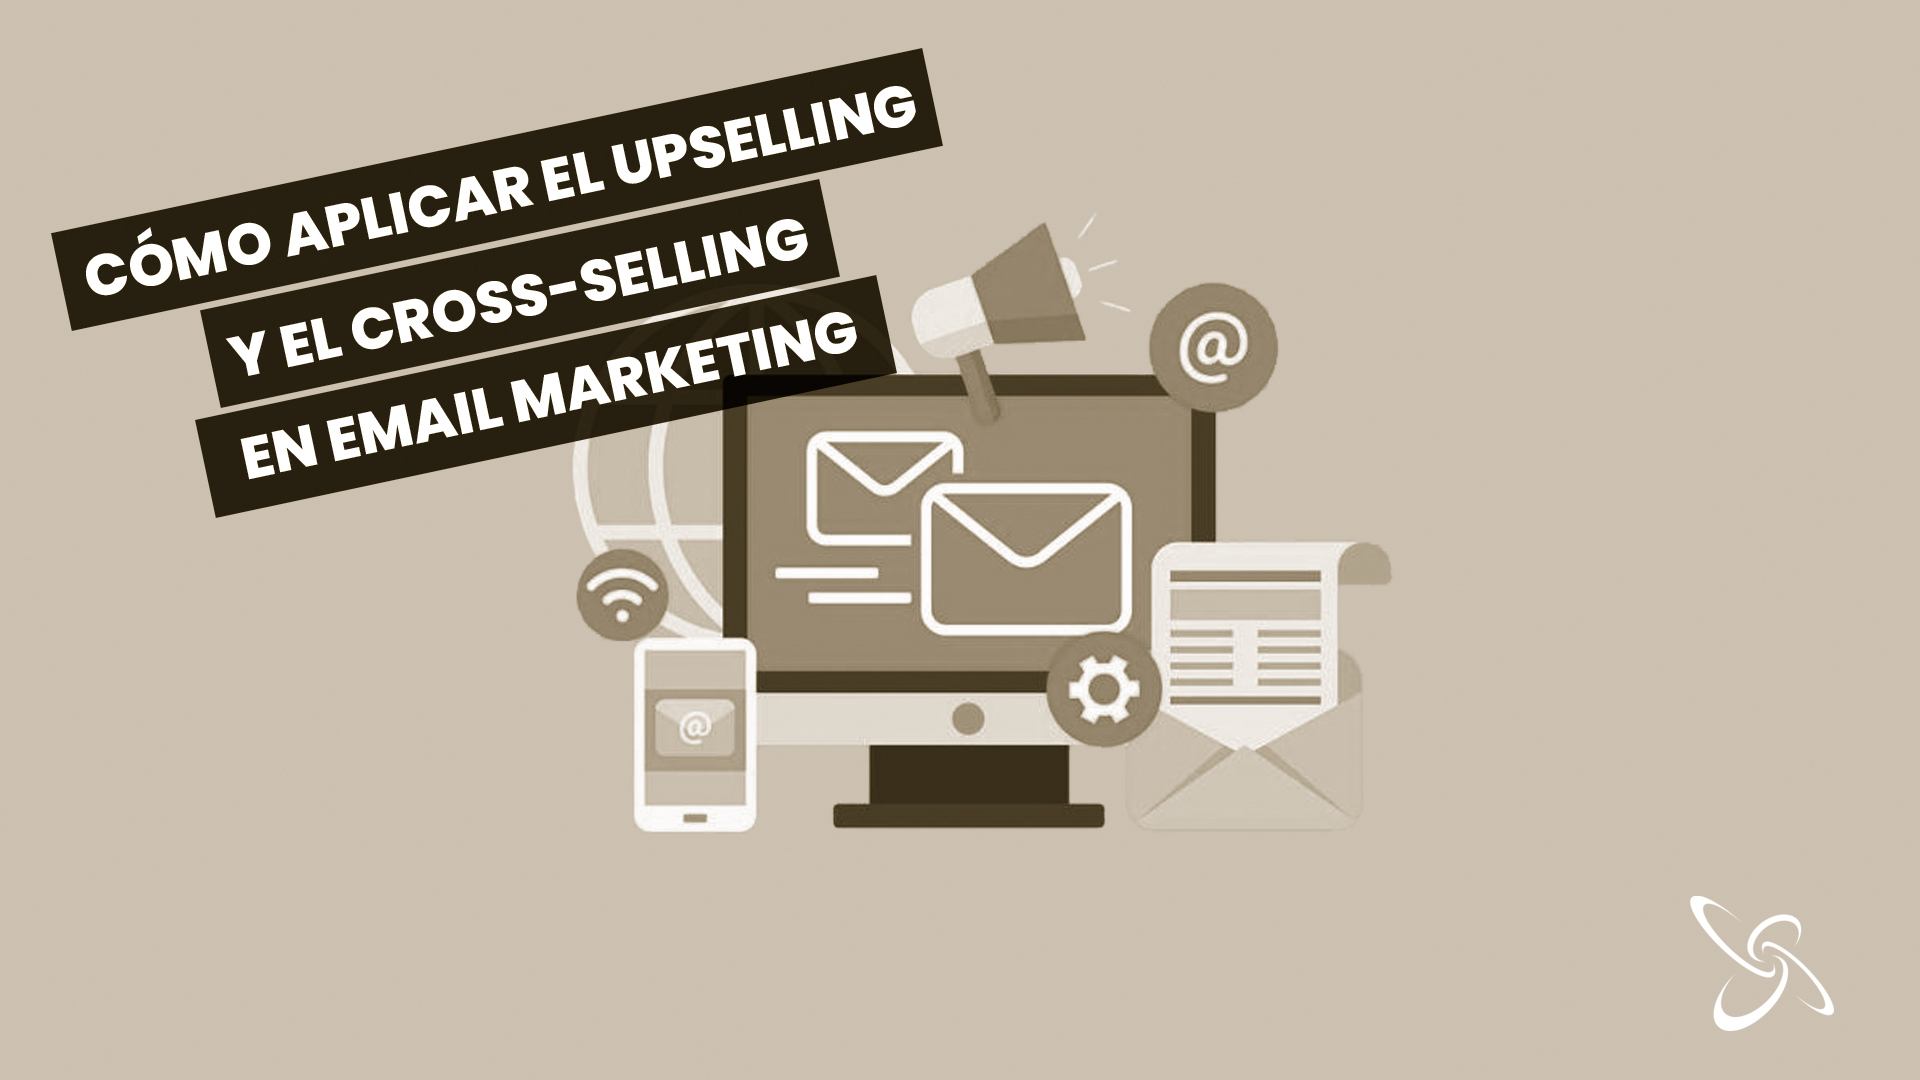 How to apply upselling and cross-selling in email marketing